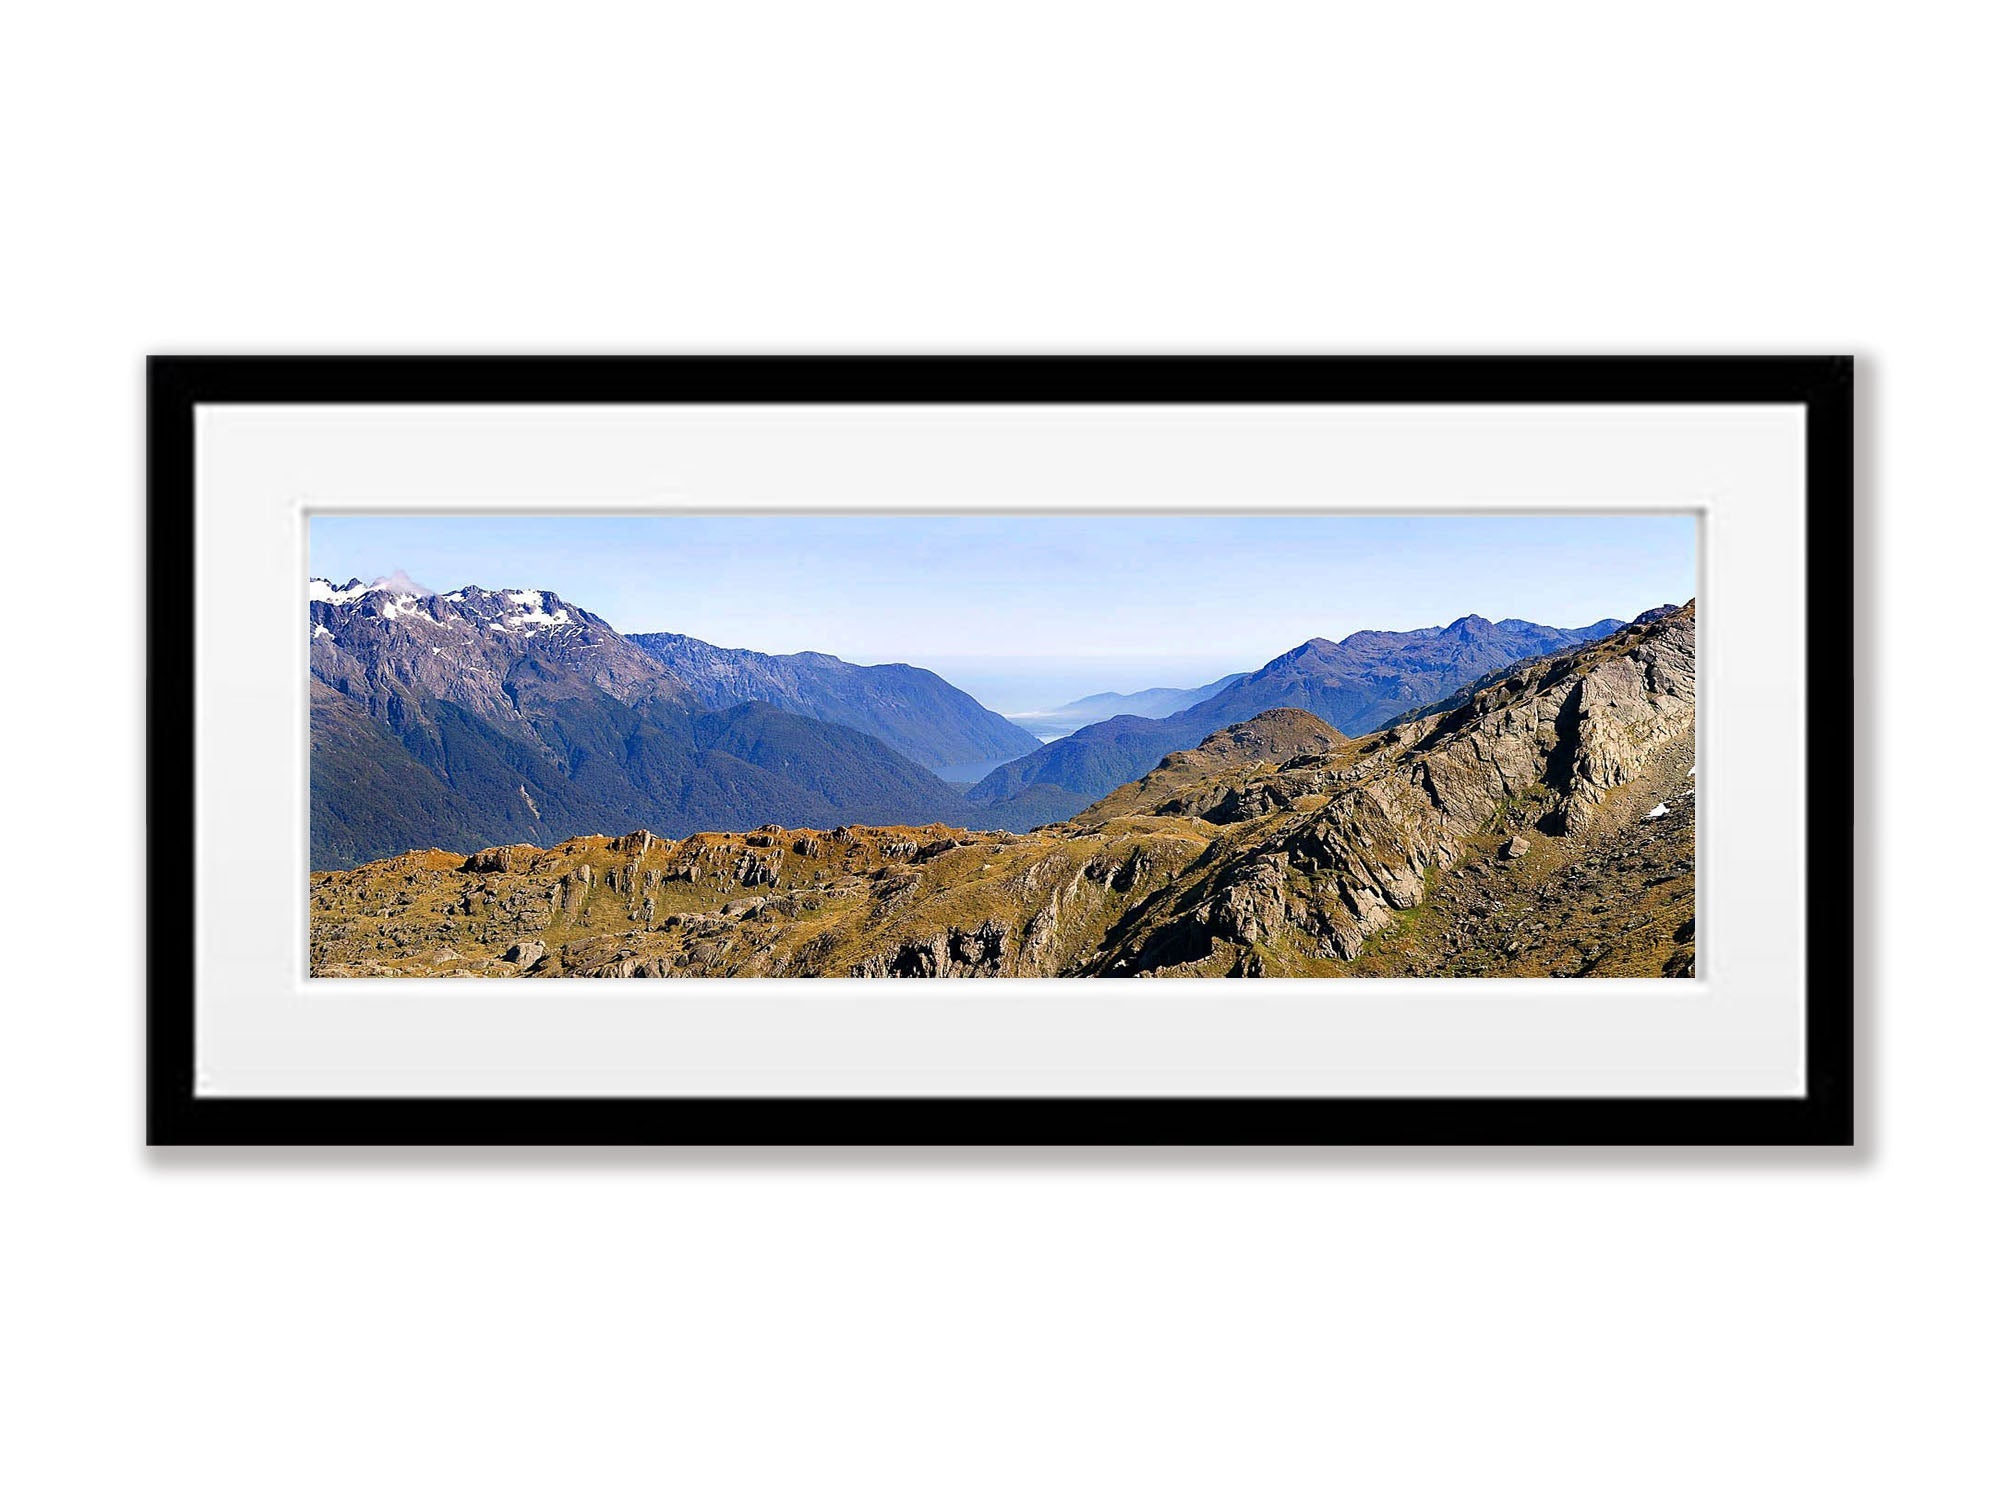 The Hollyford Valley looking toward Martins Bay, Routeburn Track - New Zealand